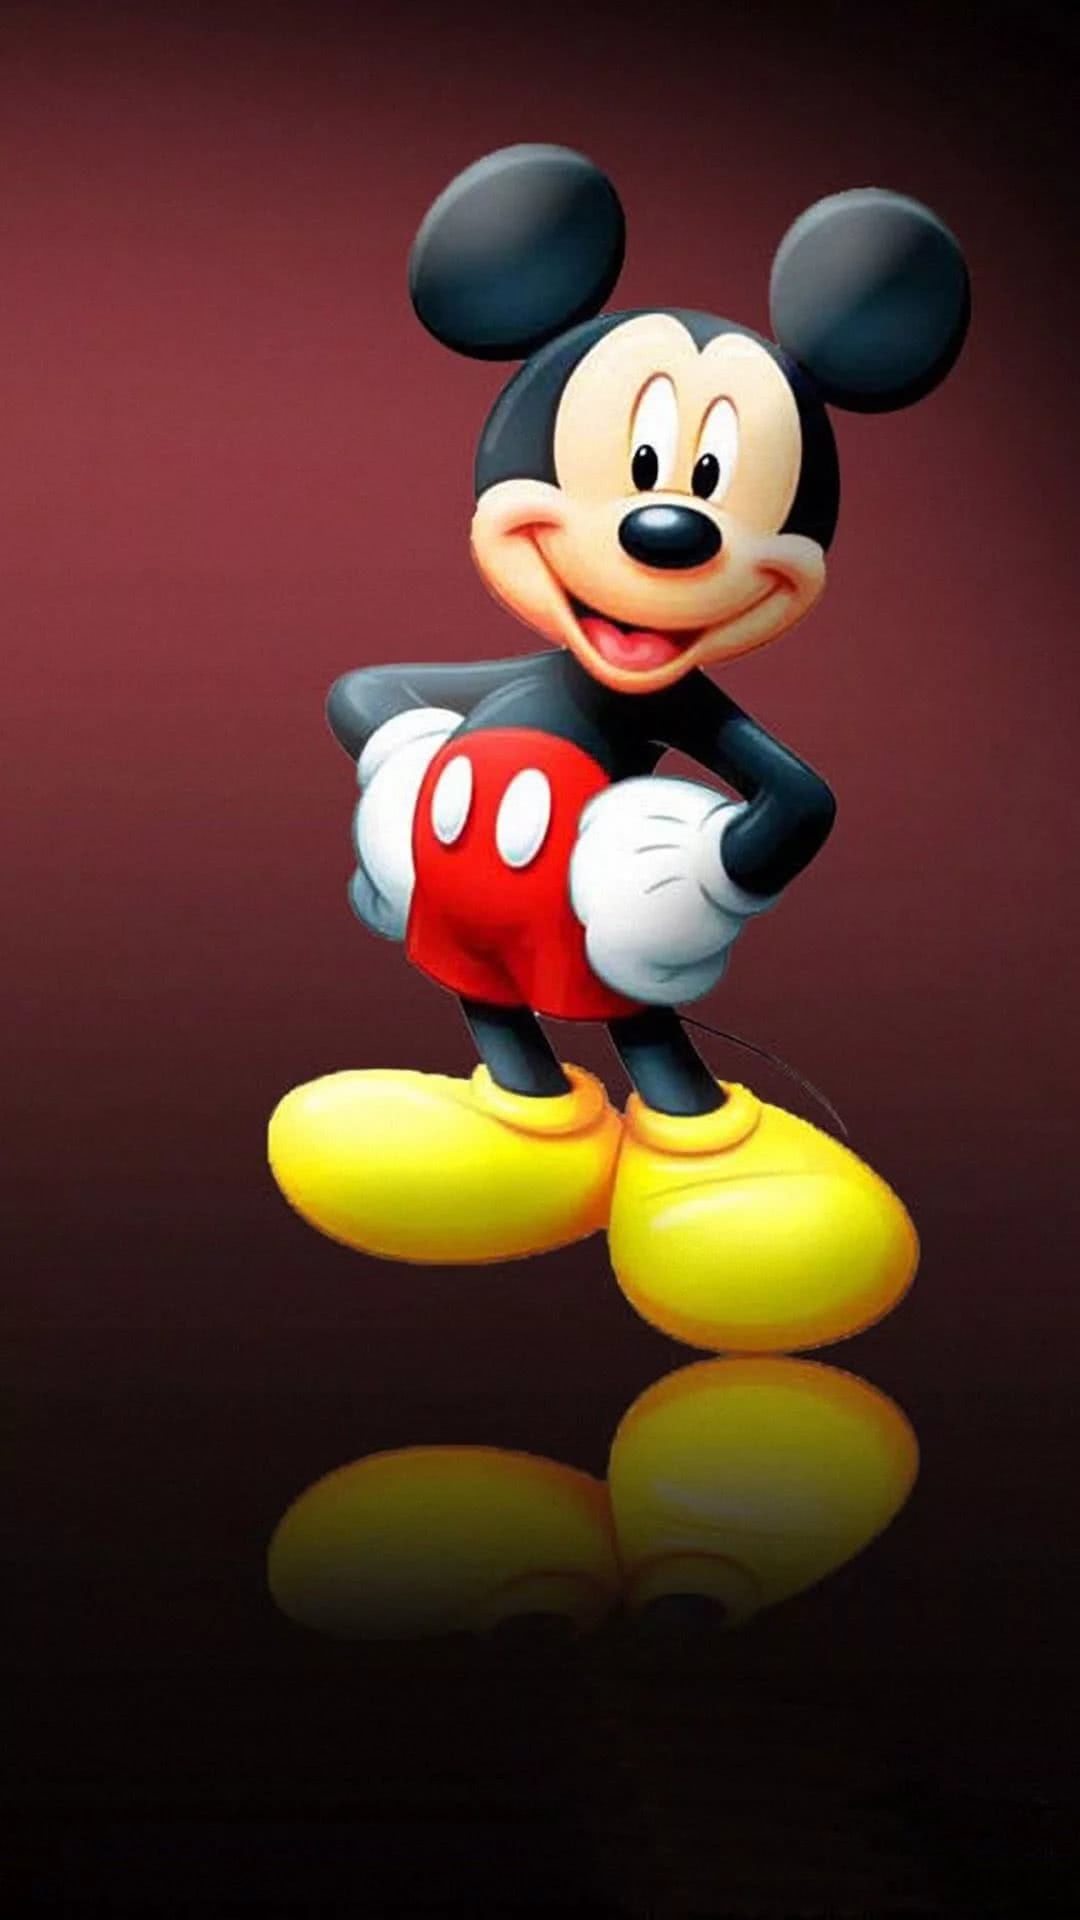 100+] Mickey Mouse Iphone Wallpapers | Wallpapers.com